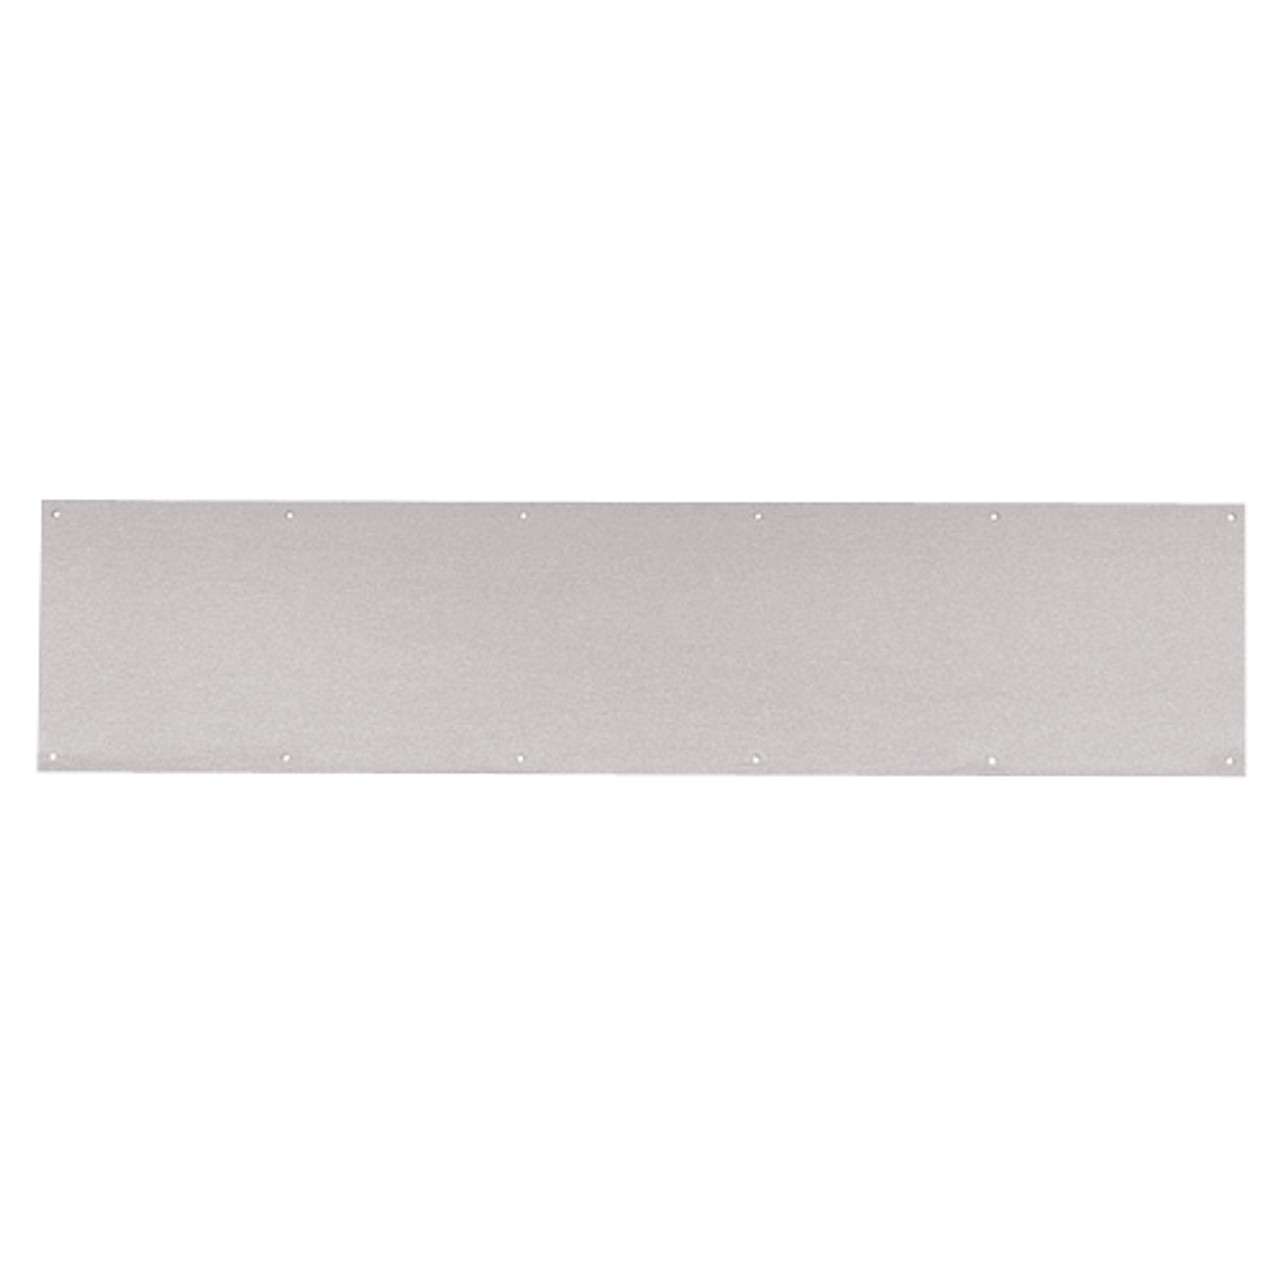 8400-US32D-18x32-B-CS Ives 8400 Series Protection Plate in Satin Stainless Steel